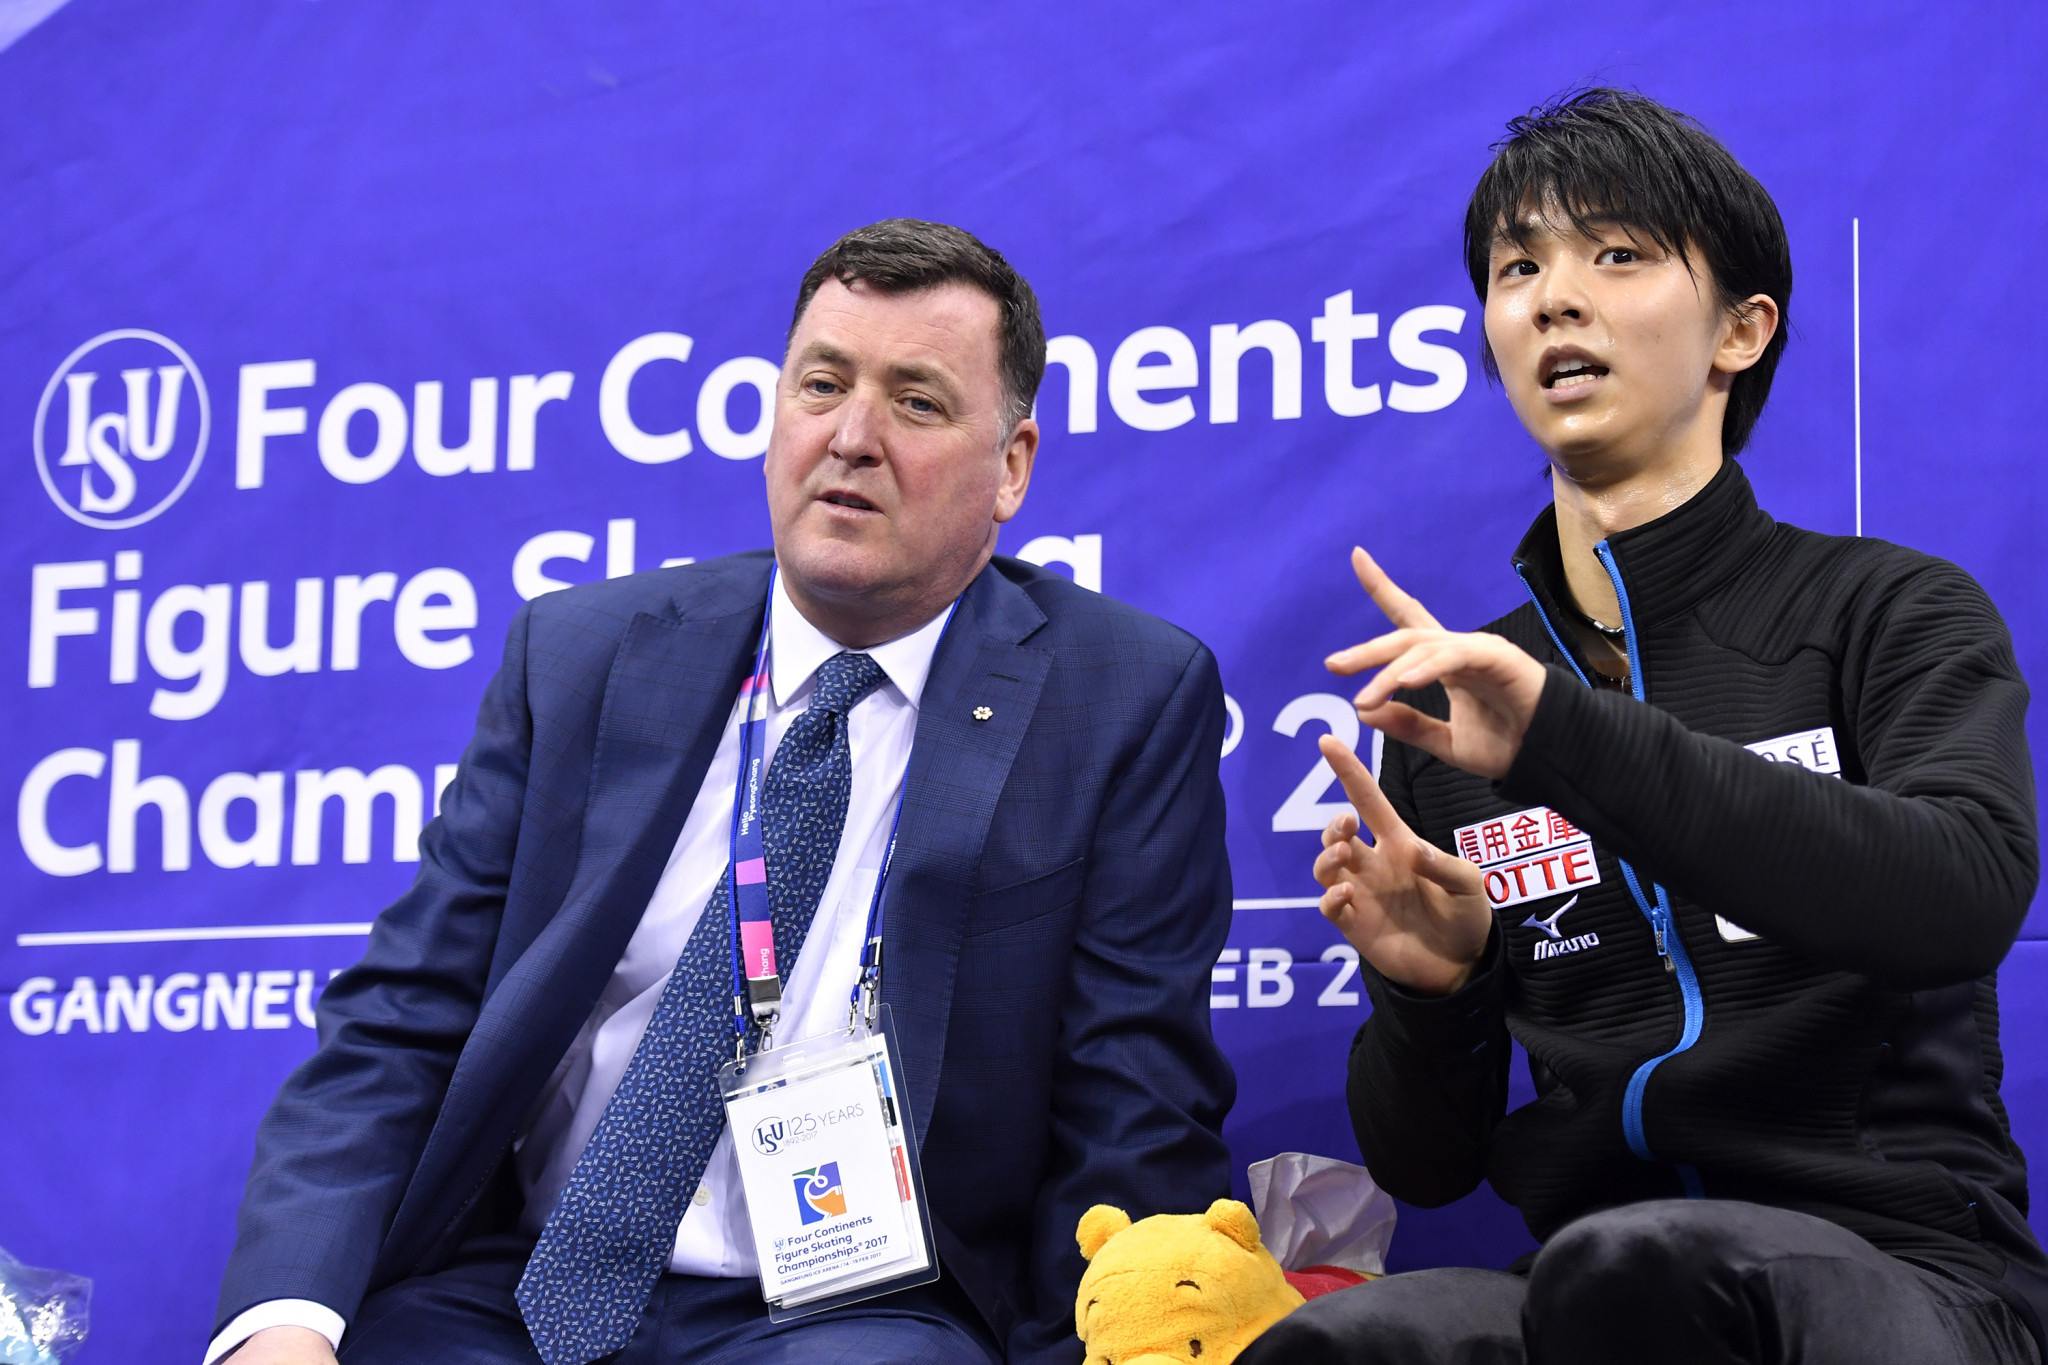 One of the modules currently on the ISU e-learning platform is advanced skating techniques with Olympic medallist Brian Orser, who has coached South Korea's Yuna Kim and Japan's Yuzuru Hanyu to gold medals ©Getty Images